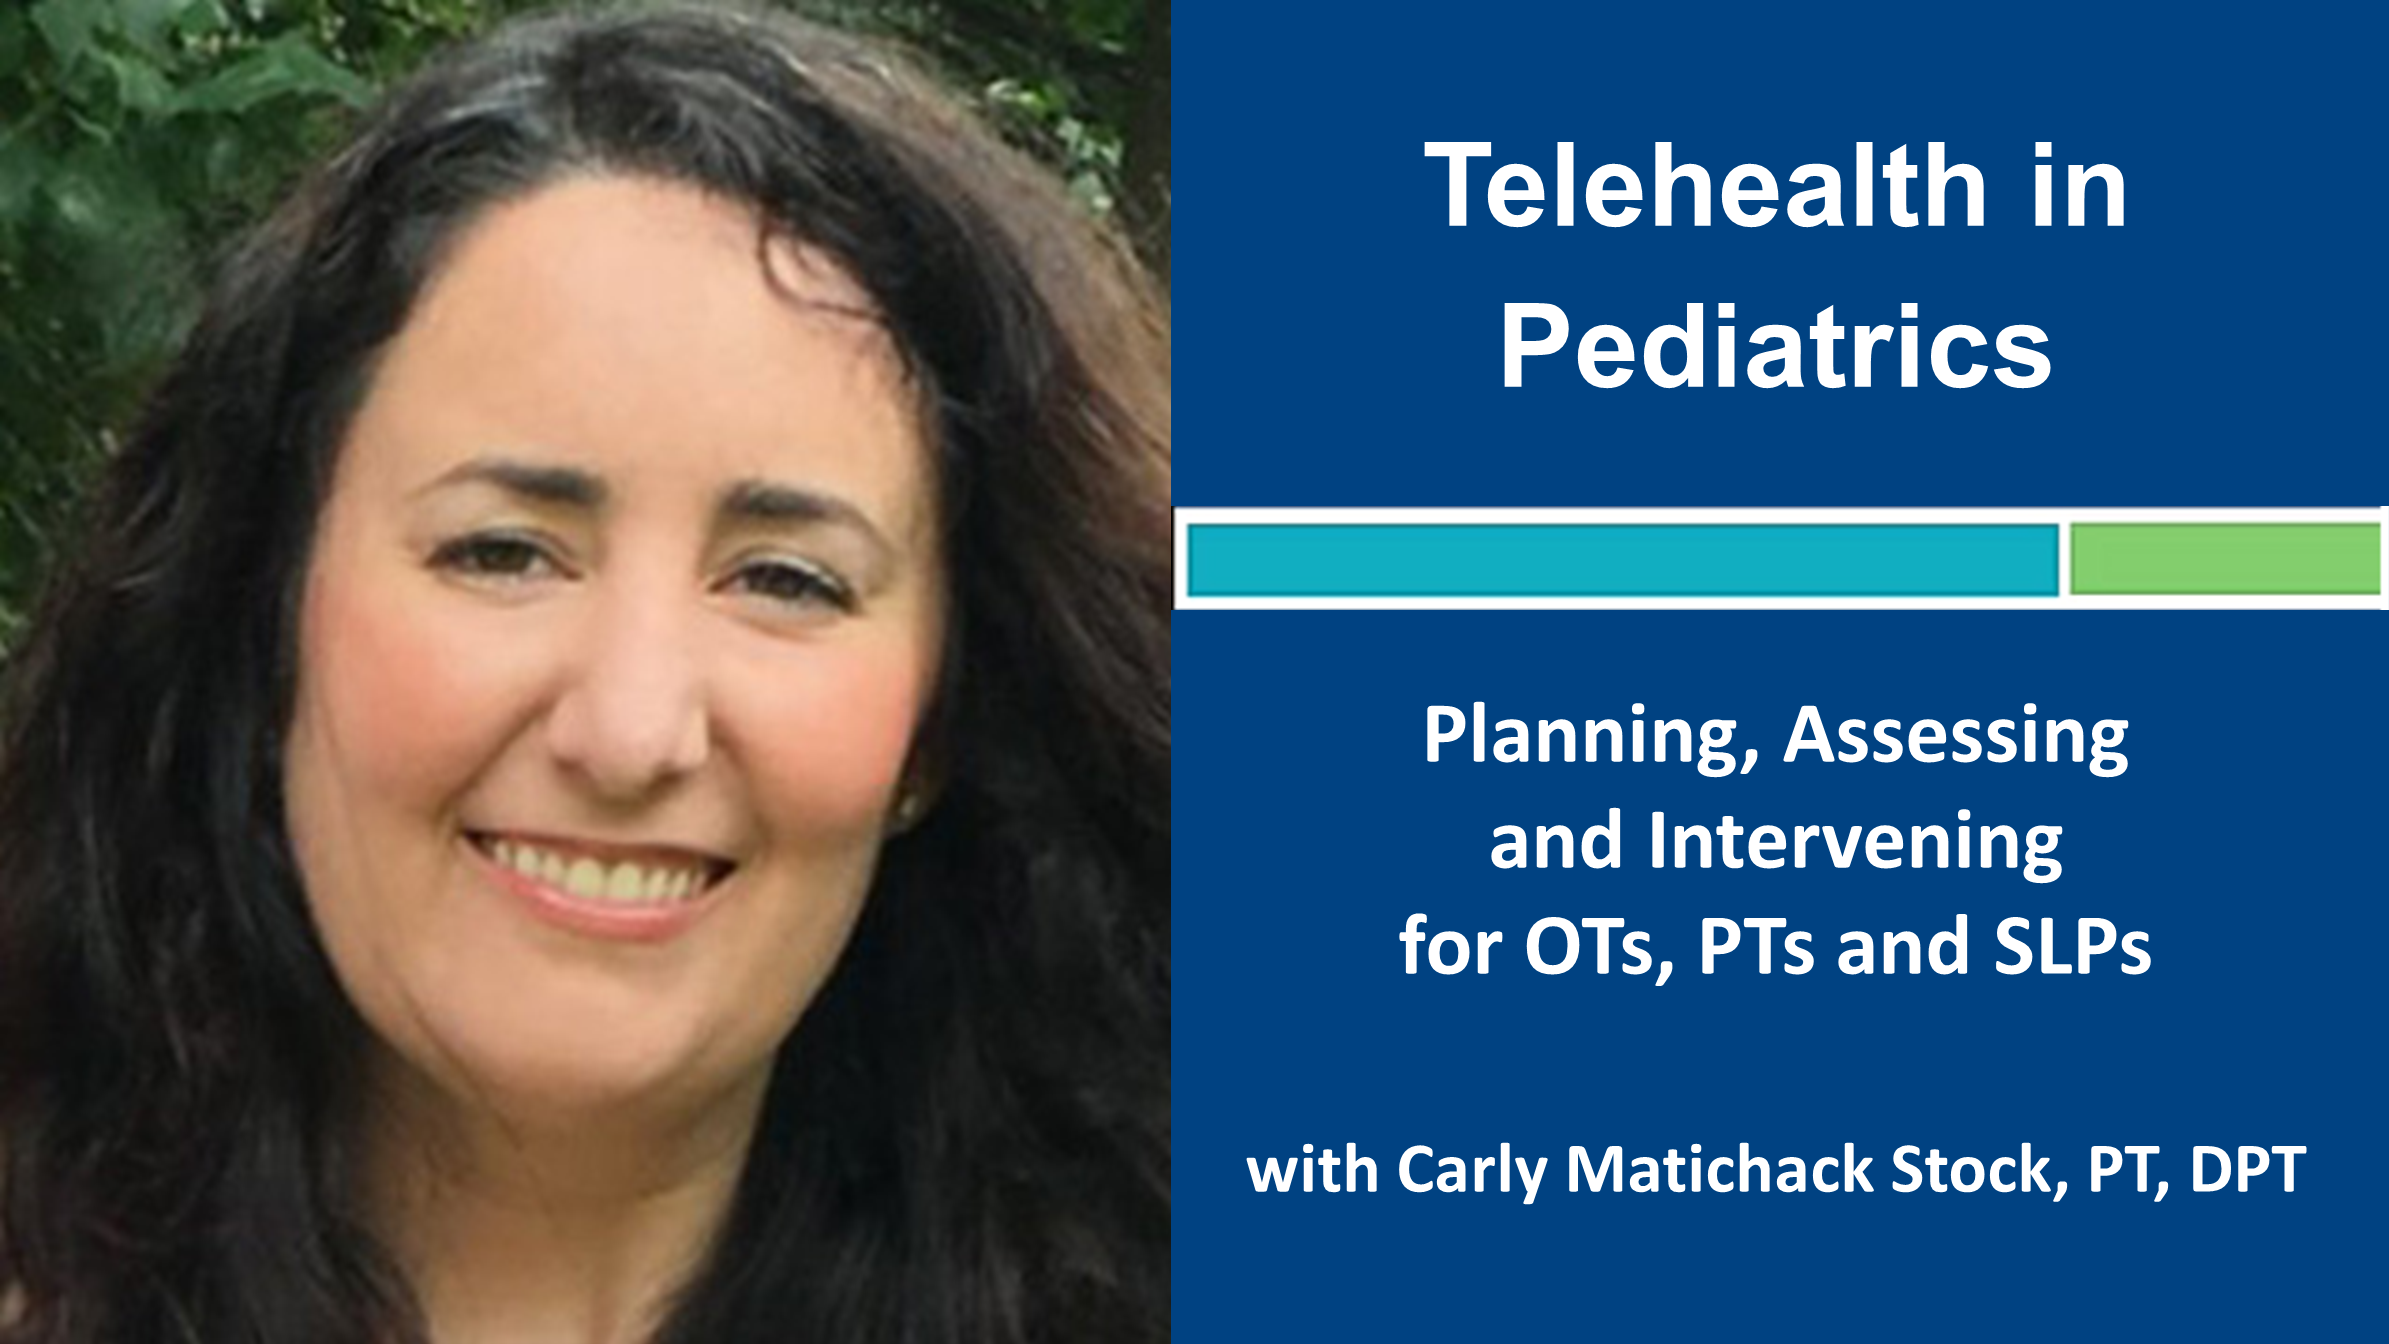 Early Bird! Register by September 30 and get free access to Developmental Coordination Disorder - Identification of Children with DCD with Patti Sharp OTD, OTR/L